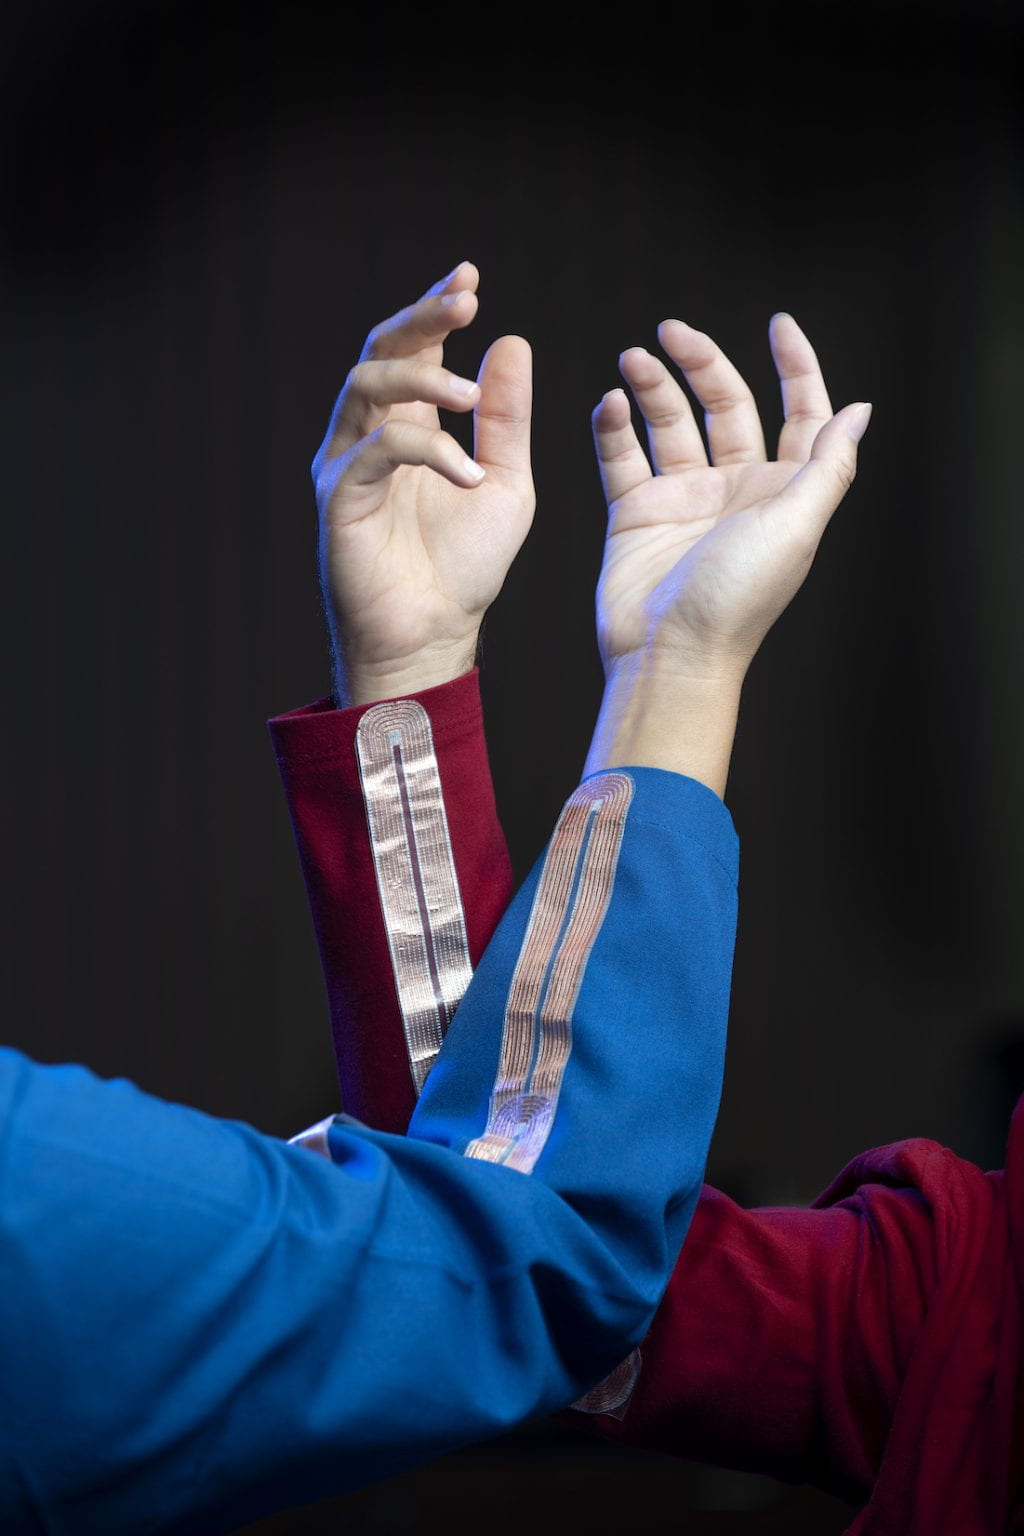 An innovative, new high-tech fabric created by engineers at UCI enables wearers to communicate with others, wirelessly charge devices and pass through security gates with the wave of an arm. Steve Zylius / UCI